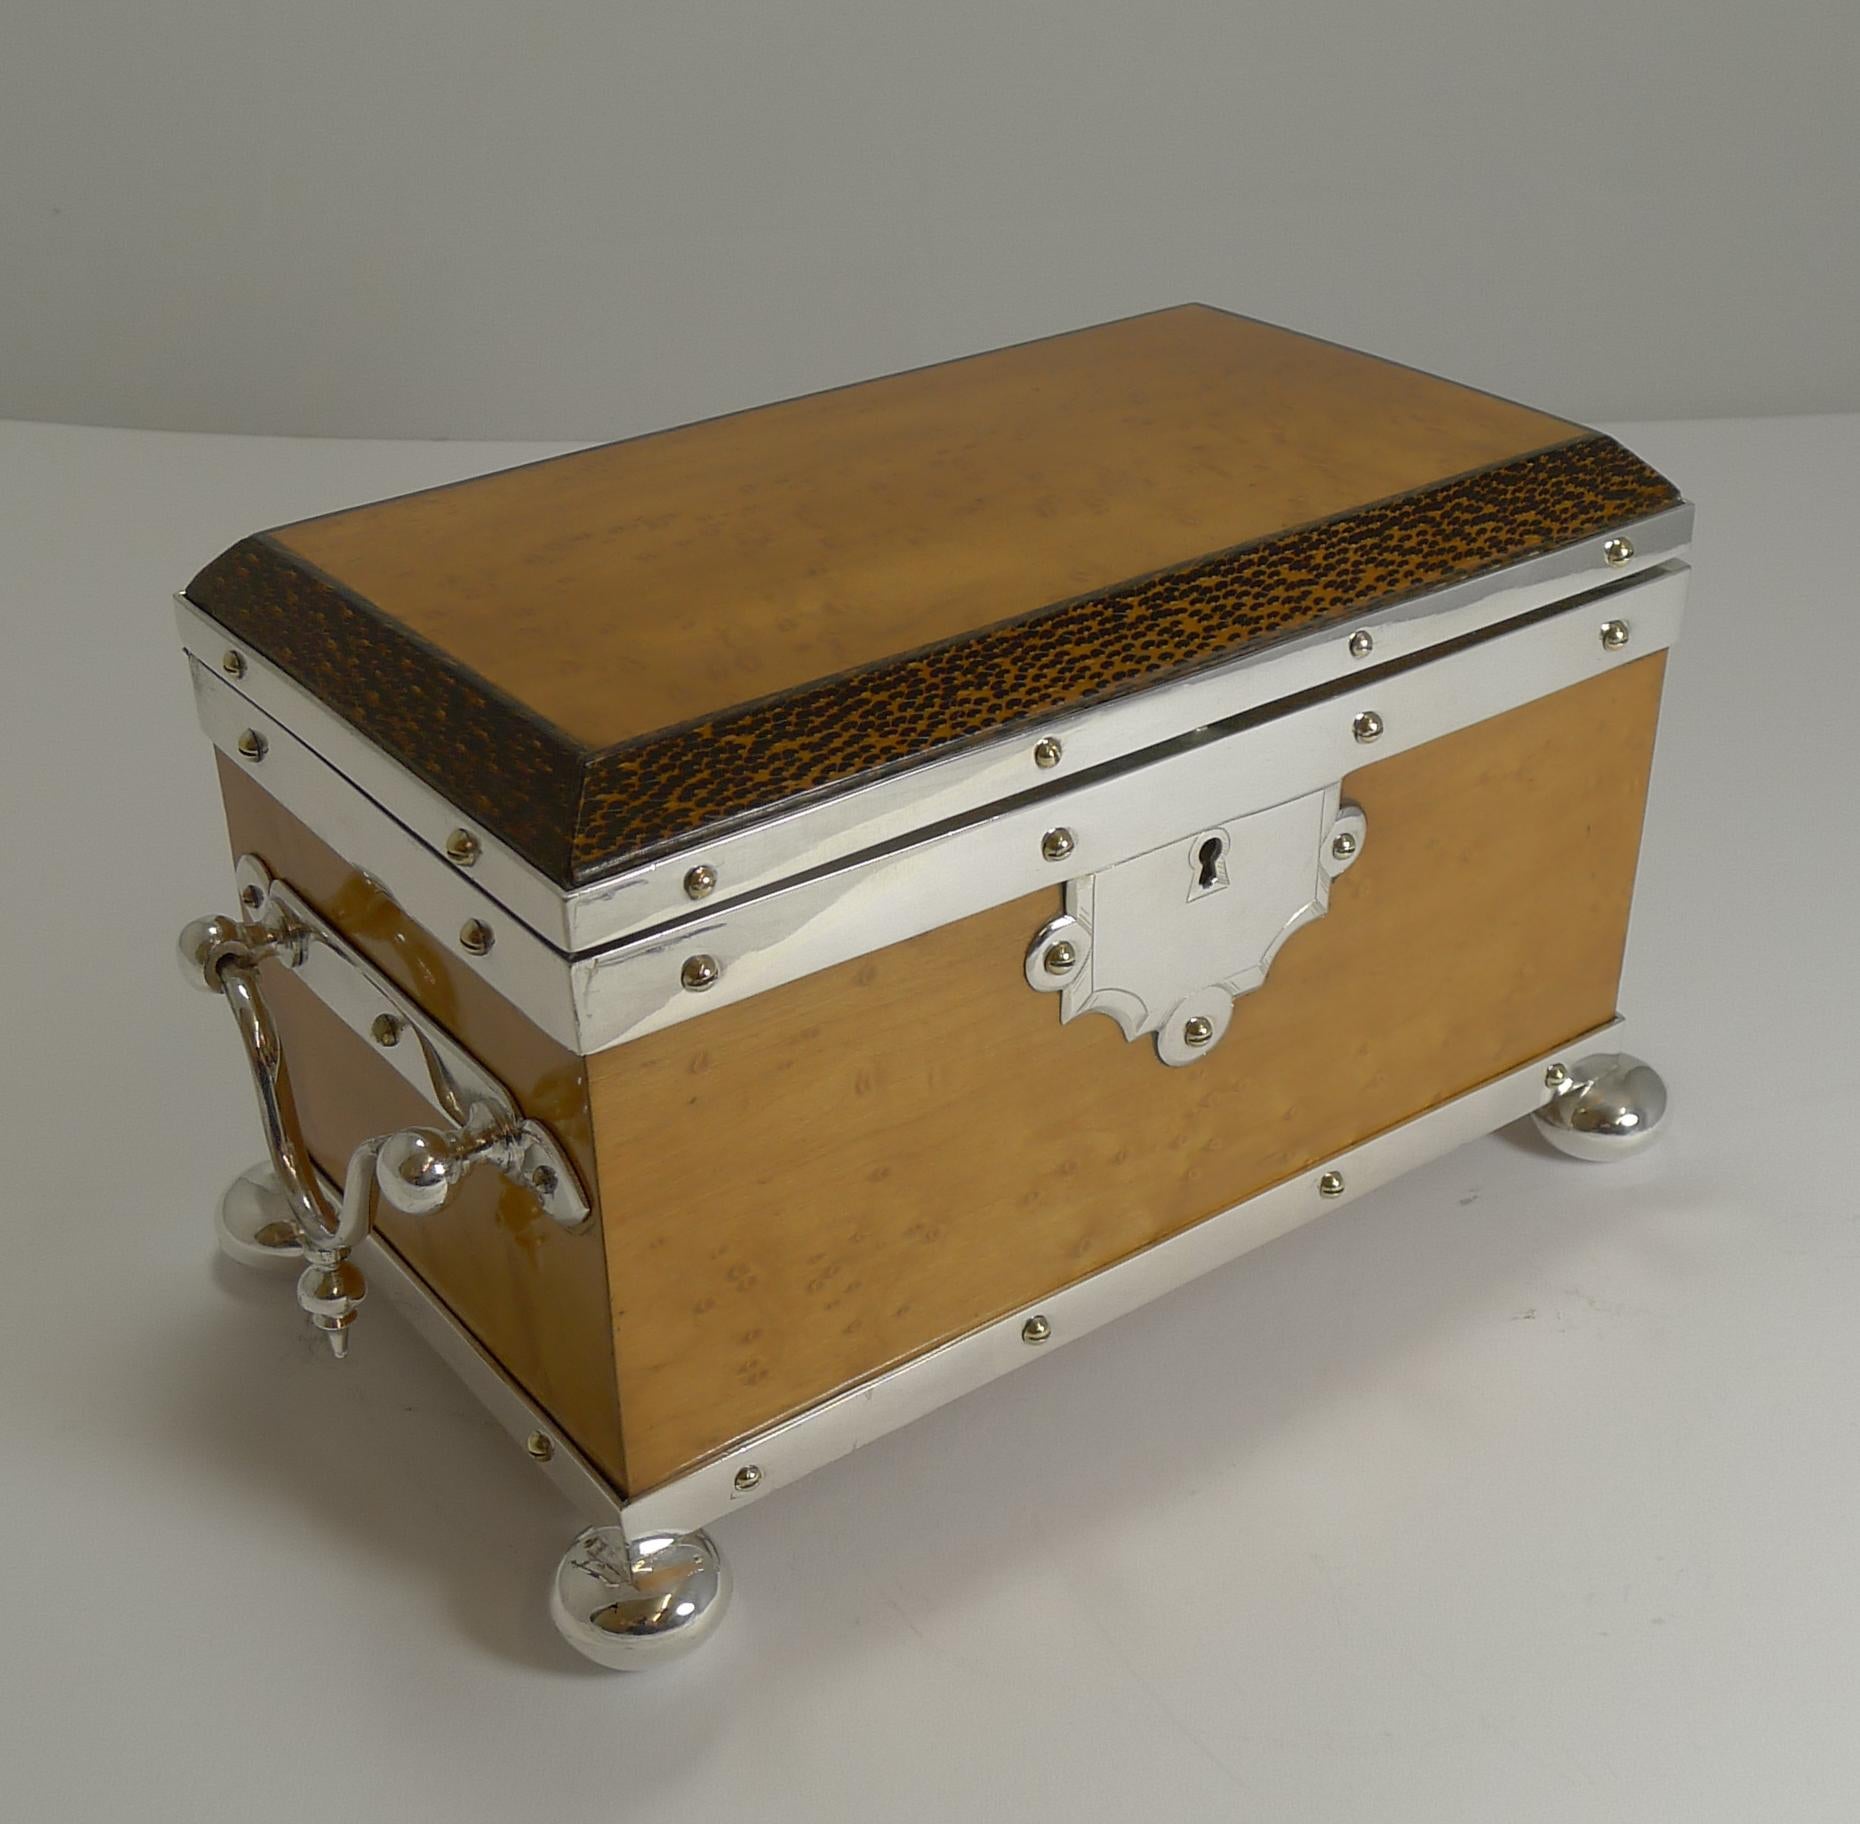 A rare find, I have never come across this tea caddy before. This style of caddy from this late Victorian period is usually made from oak with the silver plated fittings.

This one is made from a winning combination of bird's-eye maple trimmed in